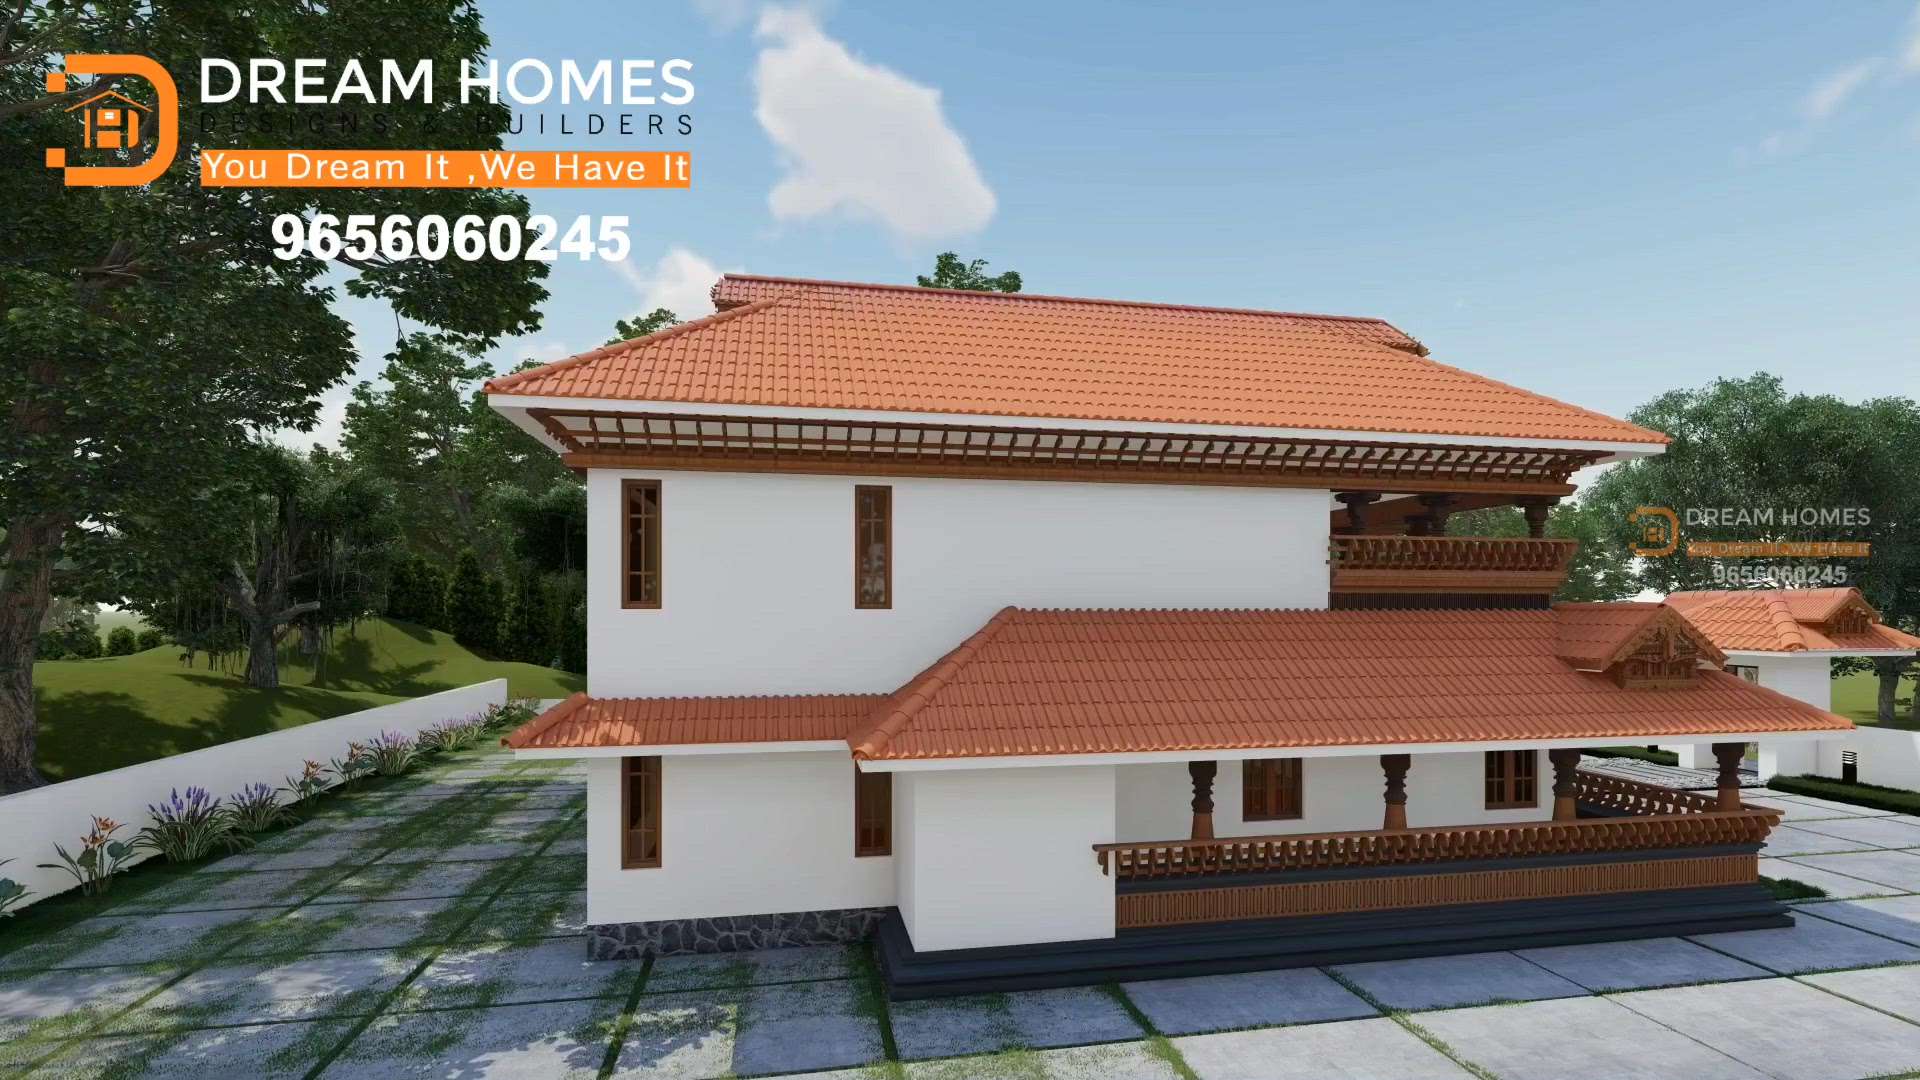 "DREAM HOMES DESIGNS & BUILDERS "
            You Dream It, We Have It'

       "Kerala's No 1 Architect for Traditional Homes"
"🙏5000 സ്‌ക്വയർ ഫീറ്റ് വിസ്ത്രീതിയിൽ കണ്ണൂർ ജില്ലയിൽ തുടങ്ങുവാനിരിക്കുന്ന പ്രൊജക്റ്റ്‌.
#traditionalhome #traditional

"A beautiful traditional structure  will be completed only with the presence of a good Architect and pure Vasthu Sastra.

Dream Homes will always be there whenever we are needed.

We are providing service to all over India 
No Compromise on Quality, Sincerity & Efficiency.

#traditionalhome #traditional 

www.dreamhomesbuilders.com
For more info
9656060245
7902453187